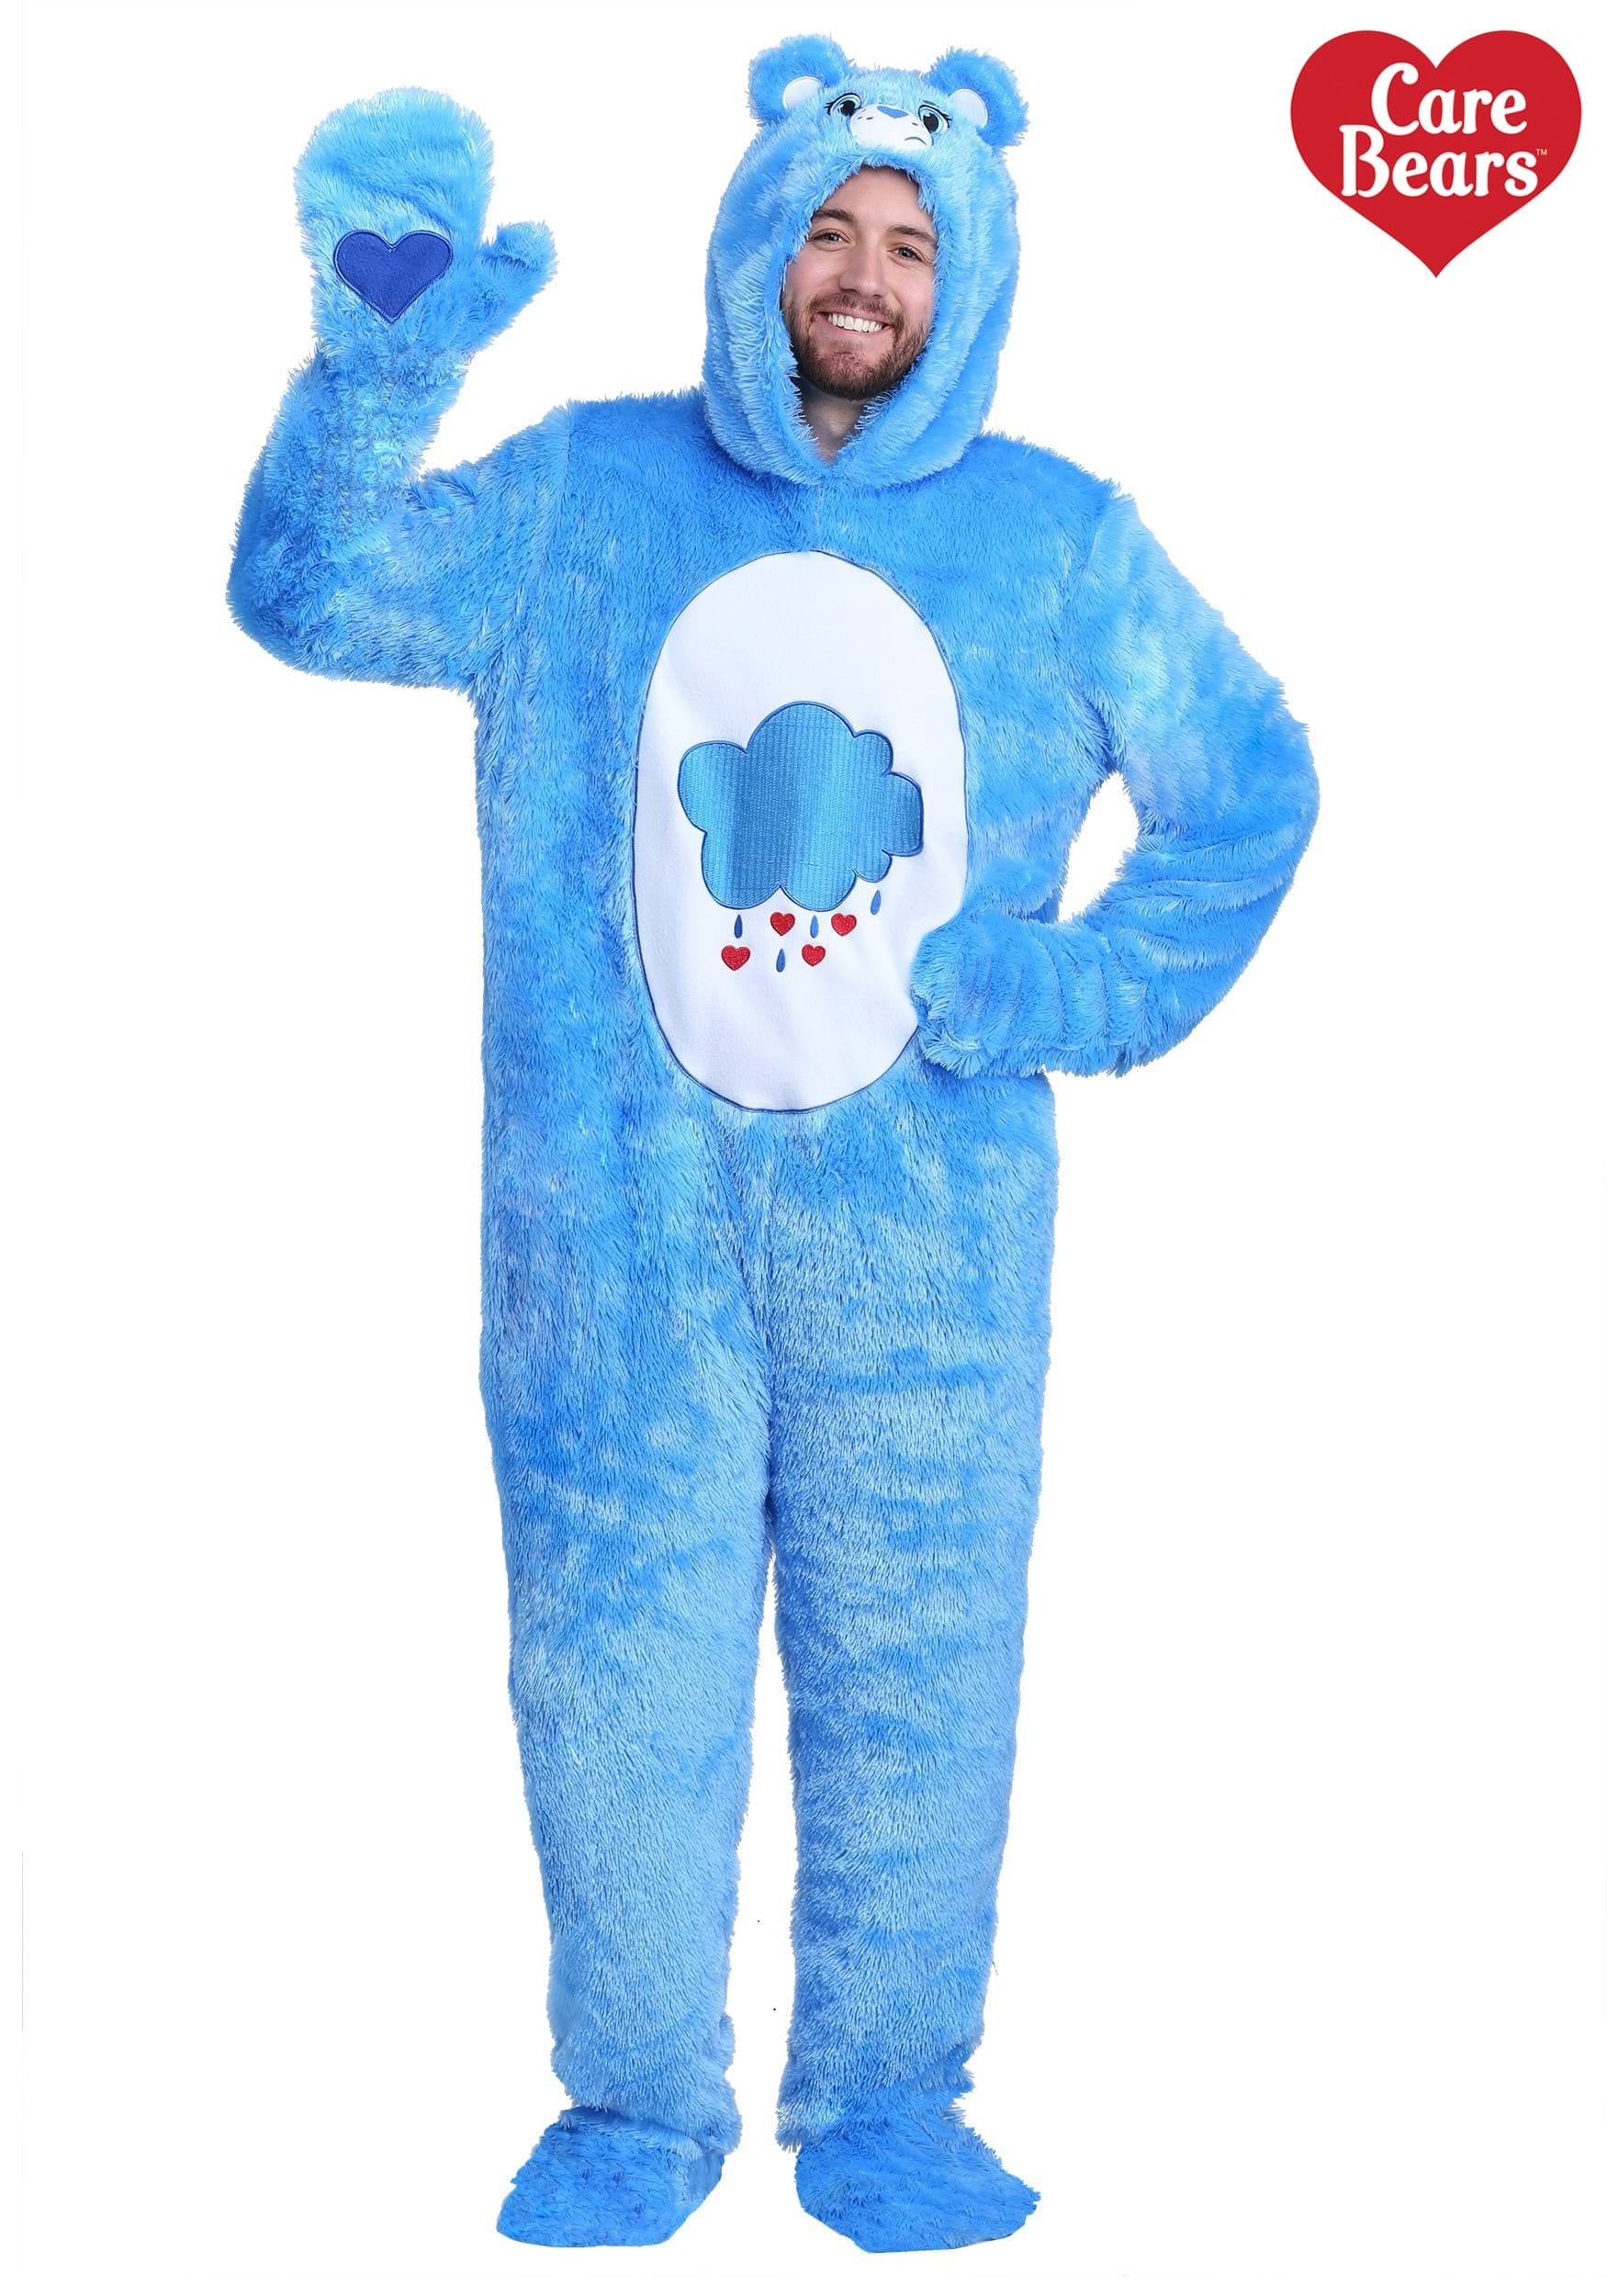 https://images.halloweencostumes.com/products/44111/1-1/adult-plus-size-care-bears-classic-grumpy-bear-costume.jpg